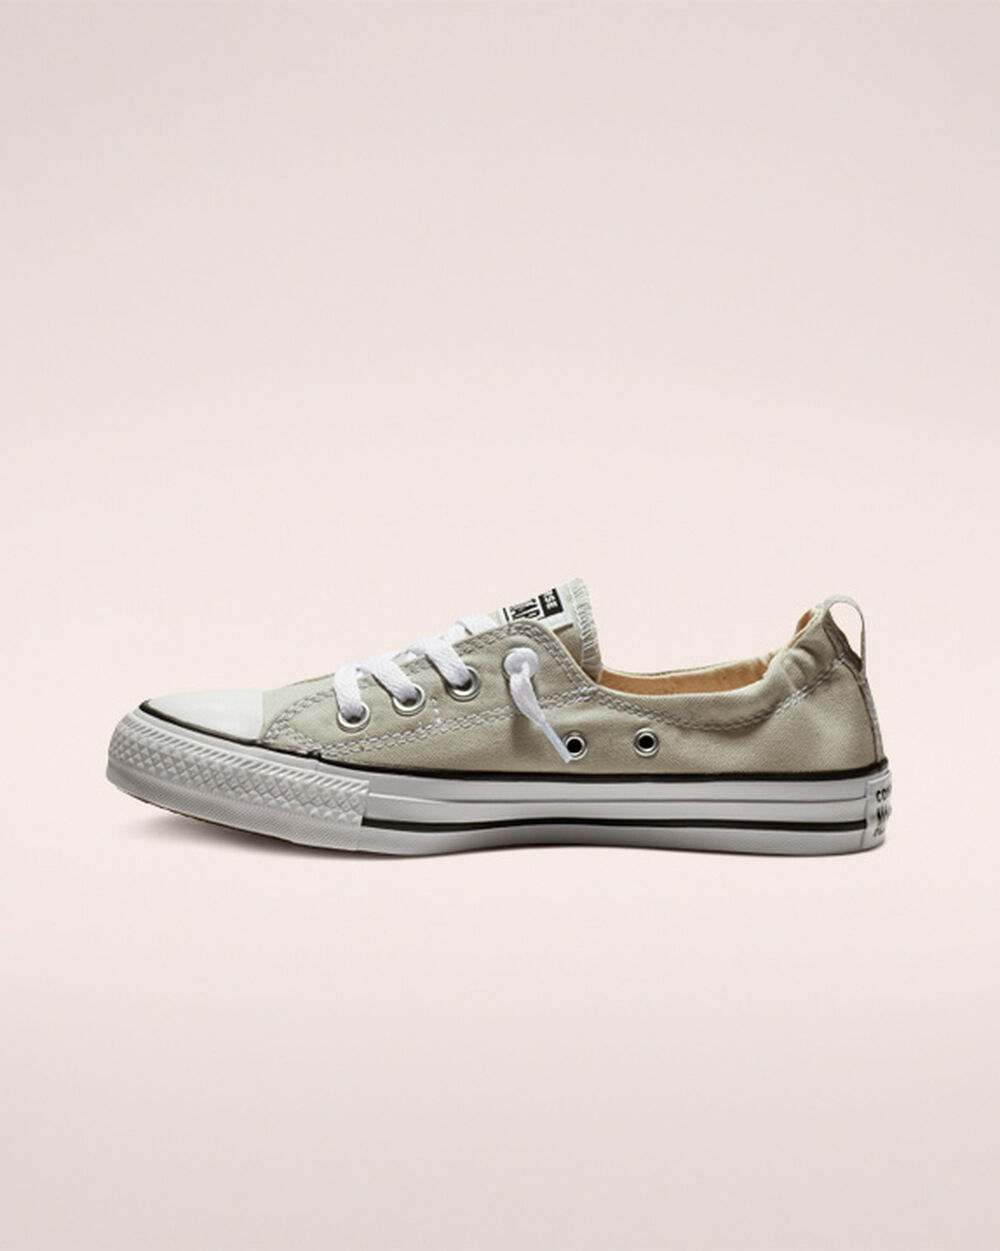 Slip On Converse Chuck Taylor All Star Mujer Grises | Mexico-674526